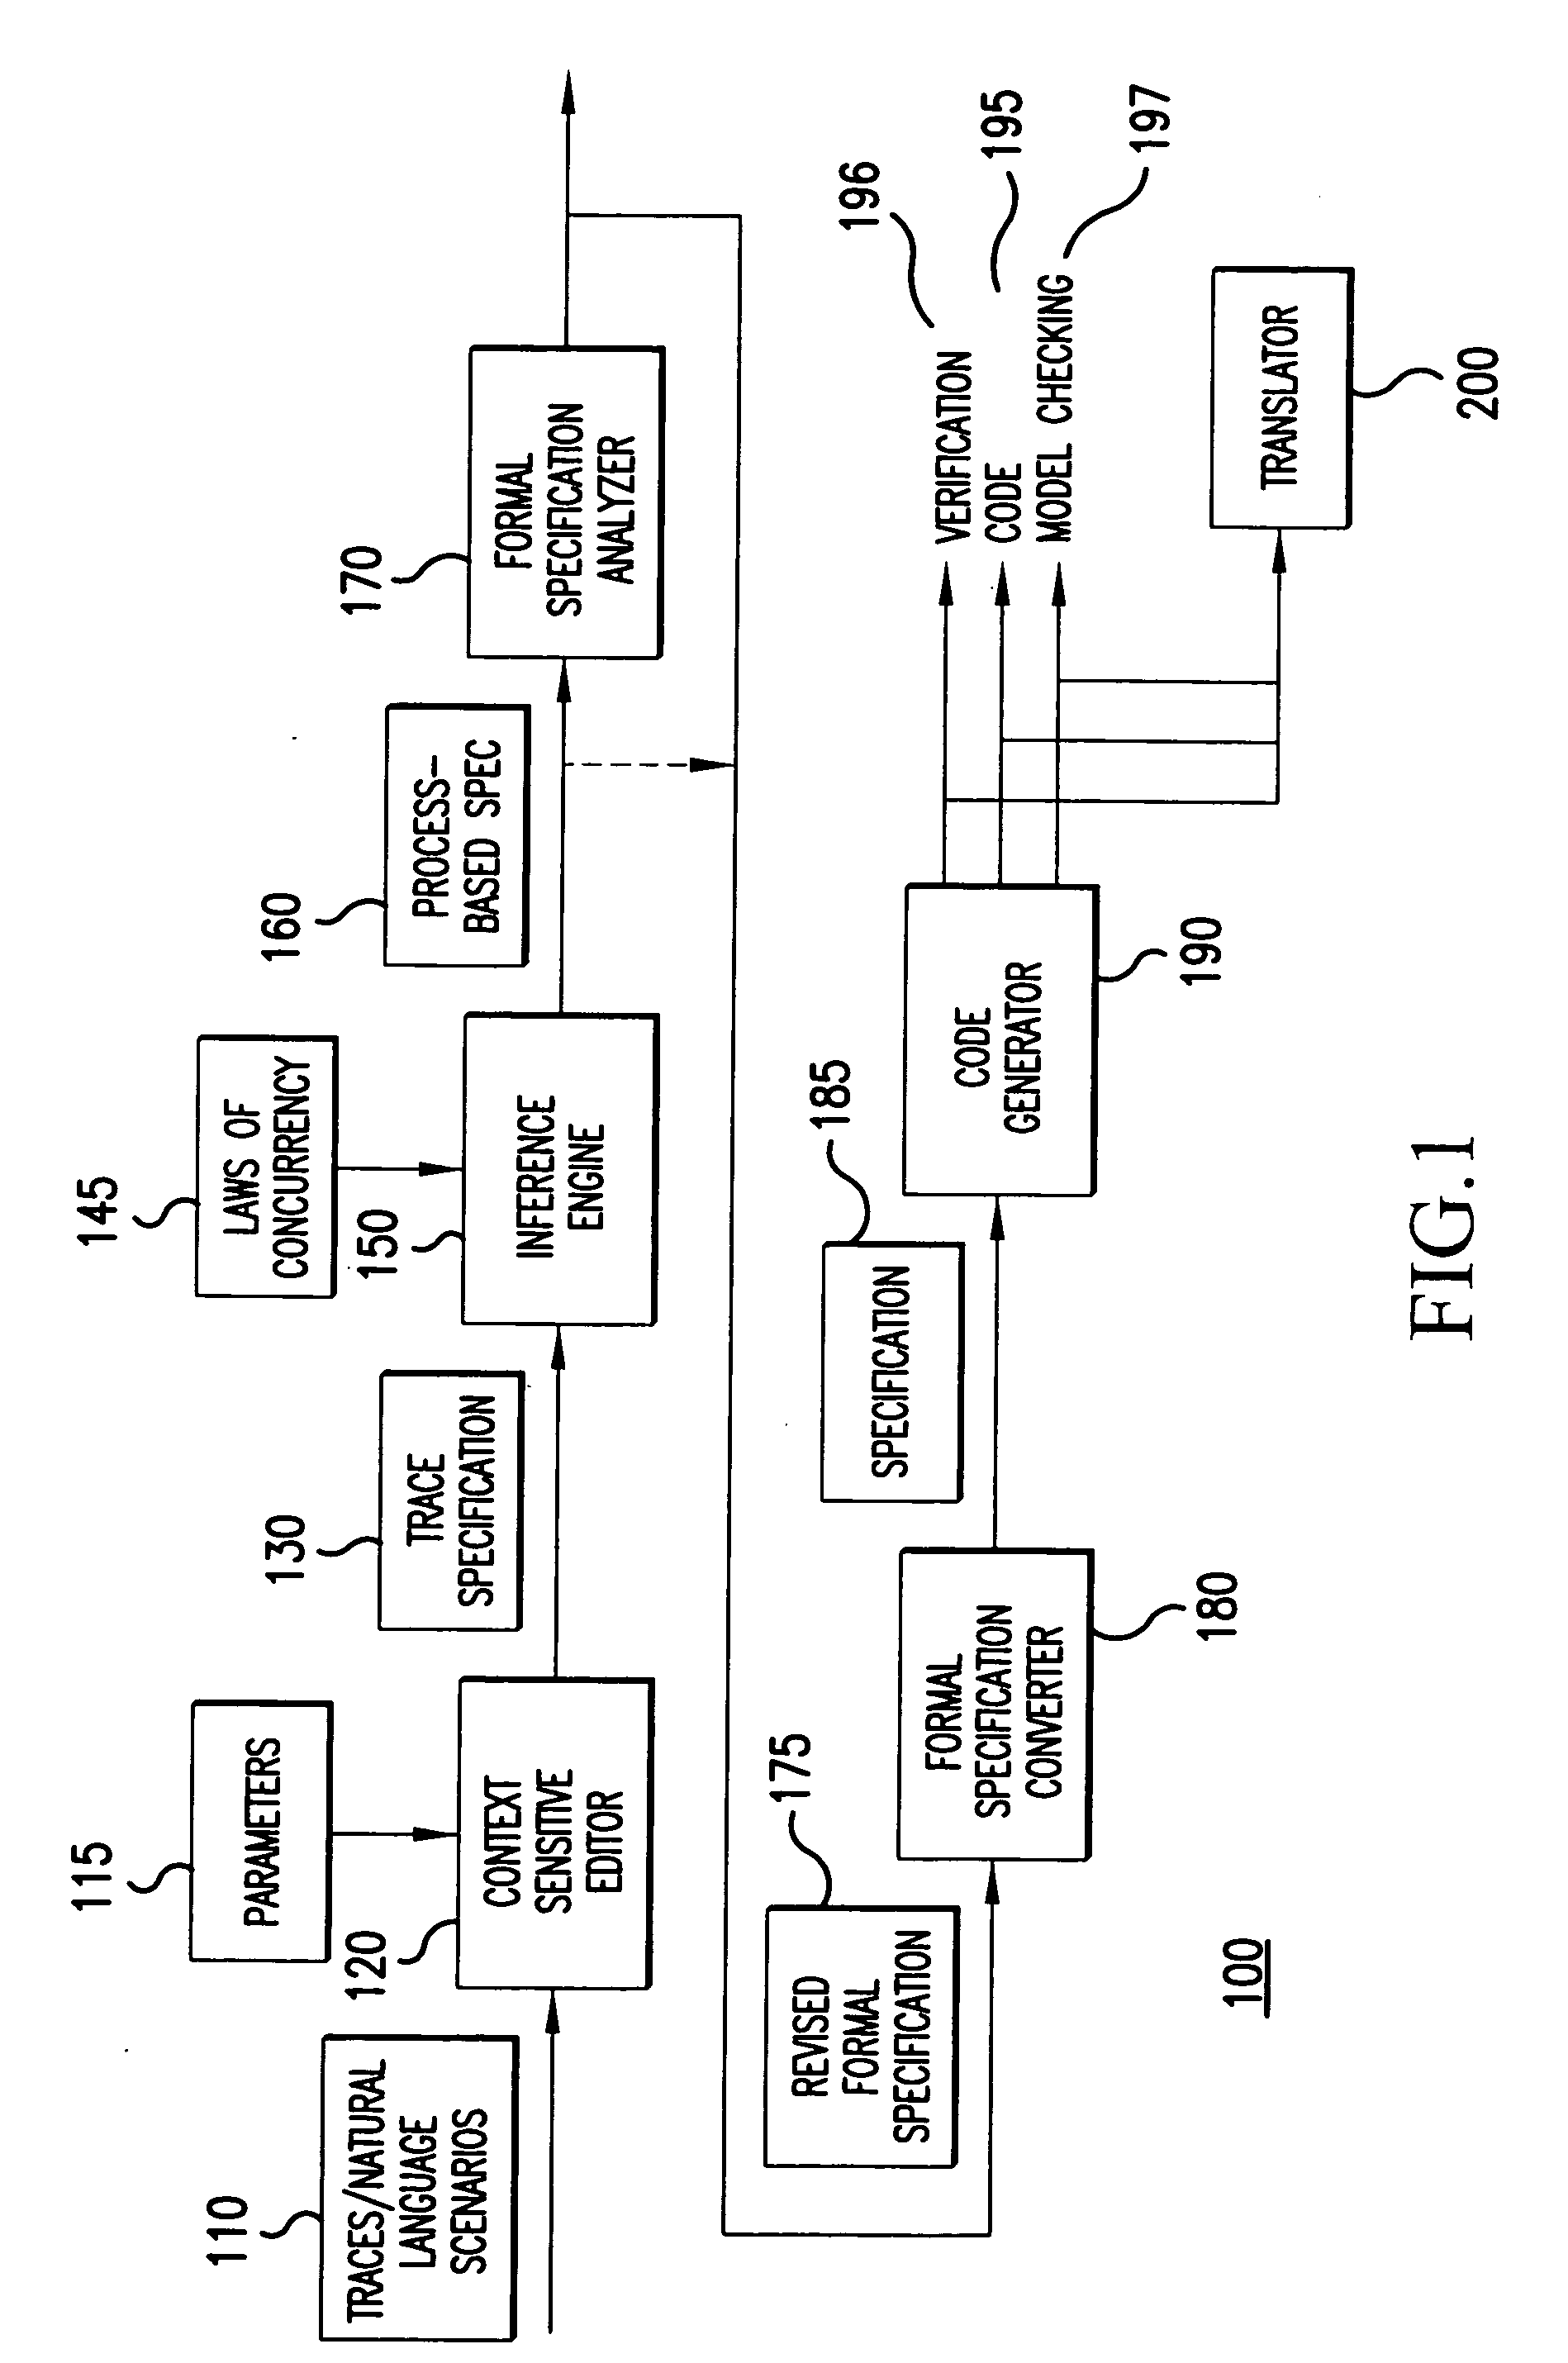 System and method for deriving a process-based specification